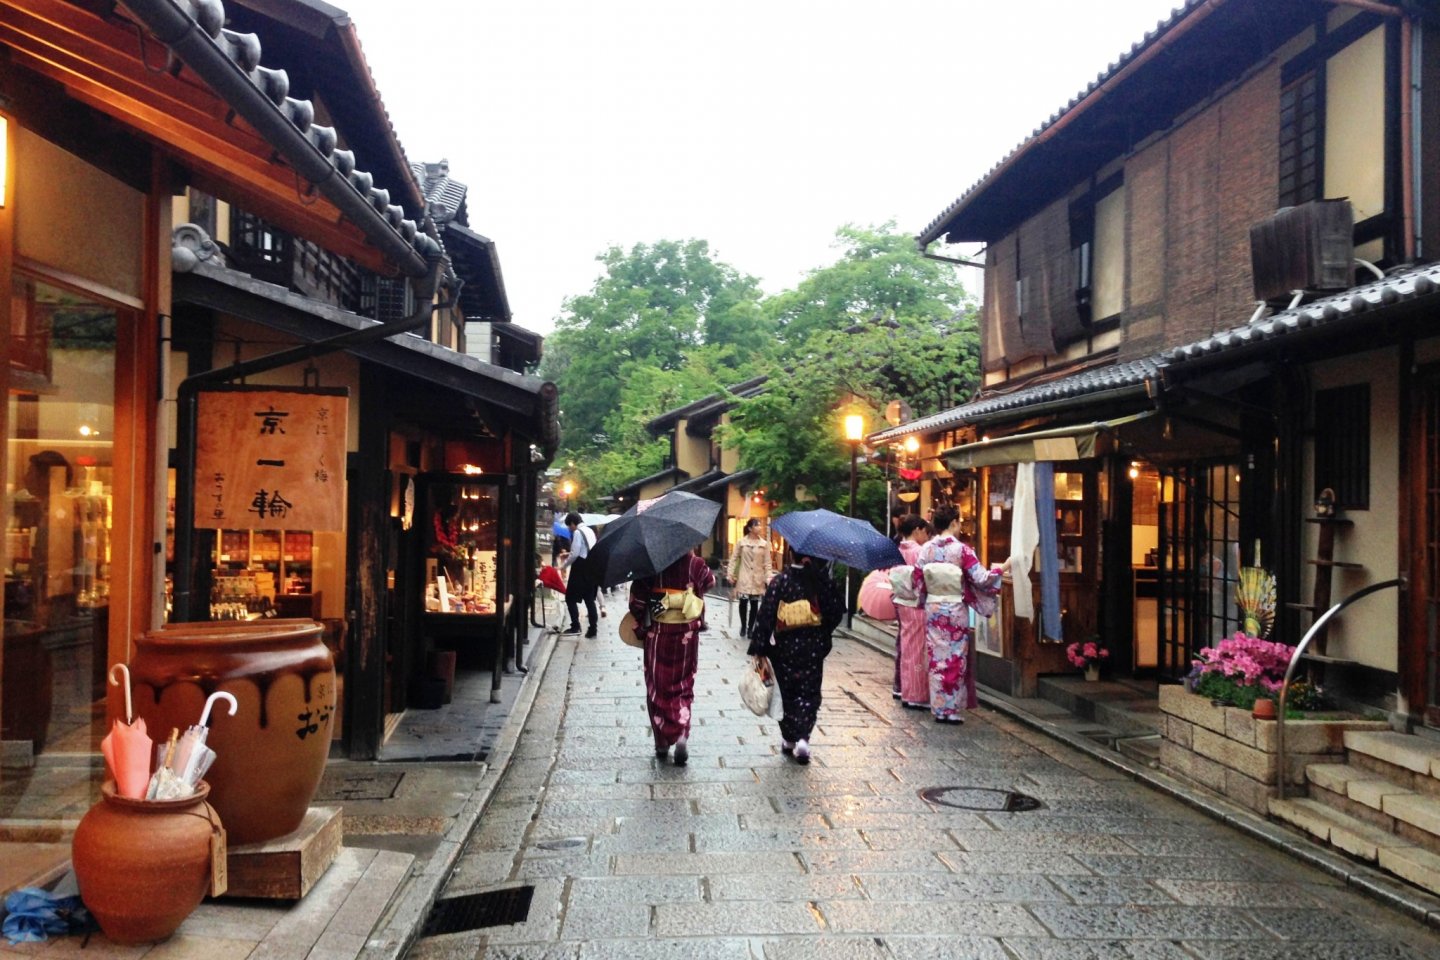 Kyoto has a quiet beauty in the rain.